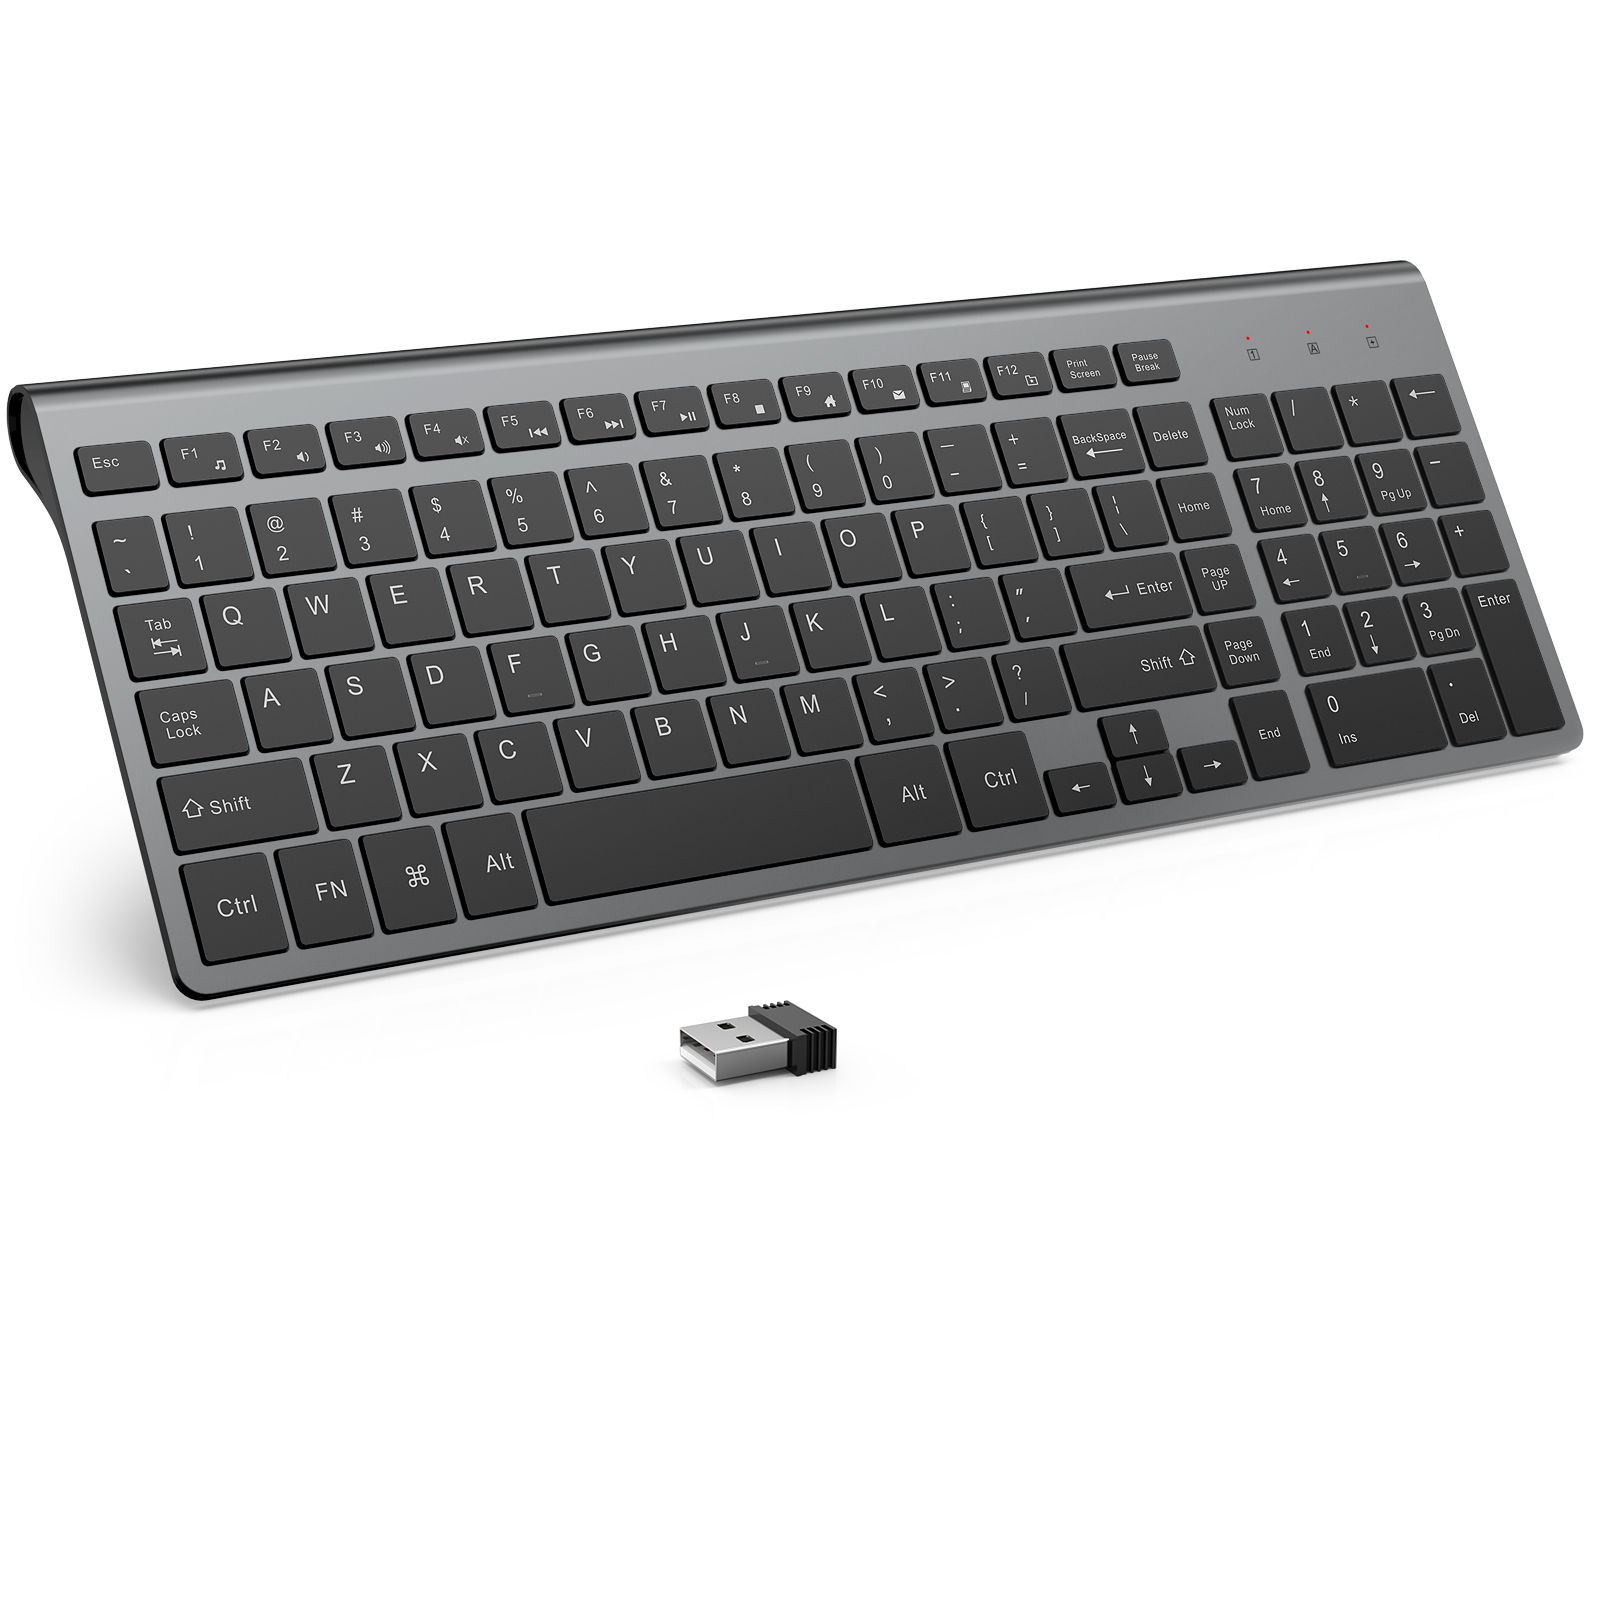 Wireless Keyboard, J JOYACCESS 2.4G Slim and Compact Wireless Keyboard with Numeric Pad for Laptop, MacBook Air, Apple, Computer, PC(Black and Grey)Wireless Mouse for Laptop，with USB Nano 2400 DPI Portable Mobile Optical Cordless Mouse Mice for Laptop (Silver+White)
